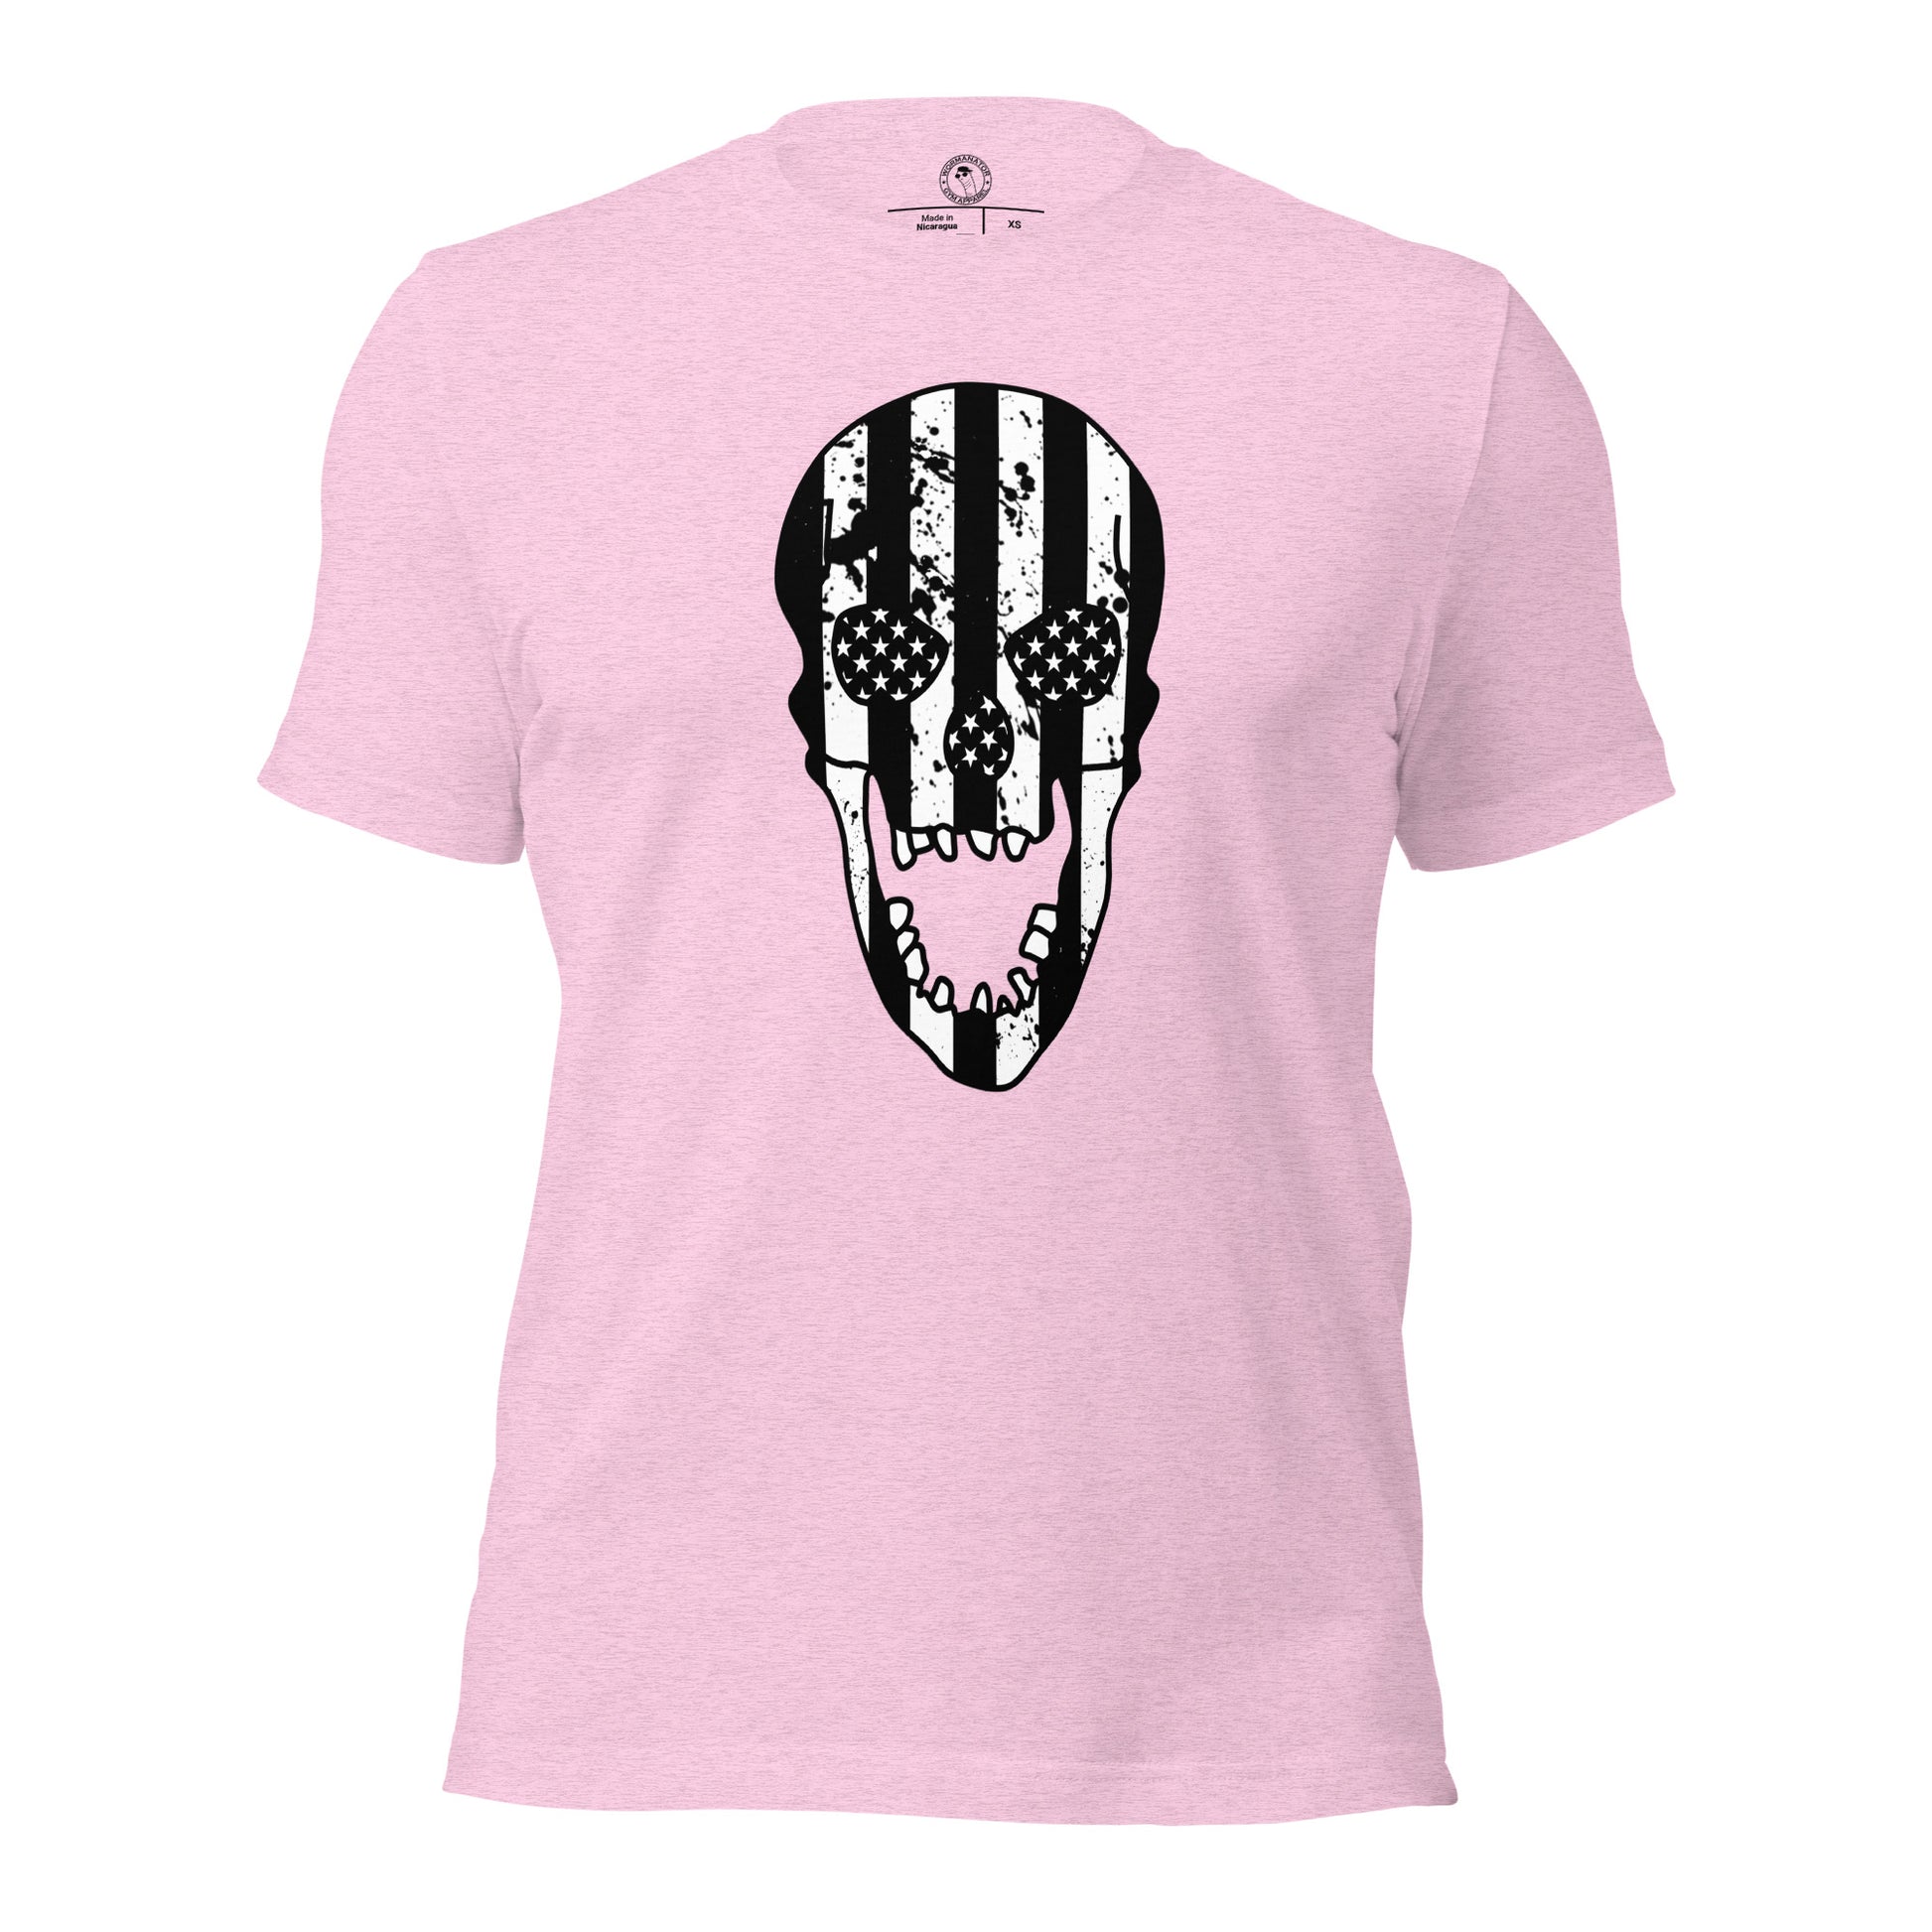 Blacked-Out USA Skull Shirt in Heather Prism Lilac